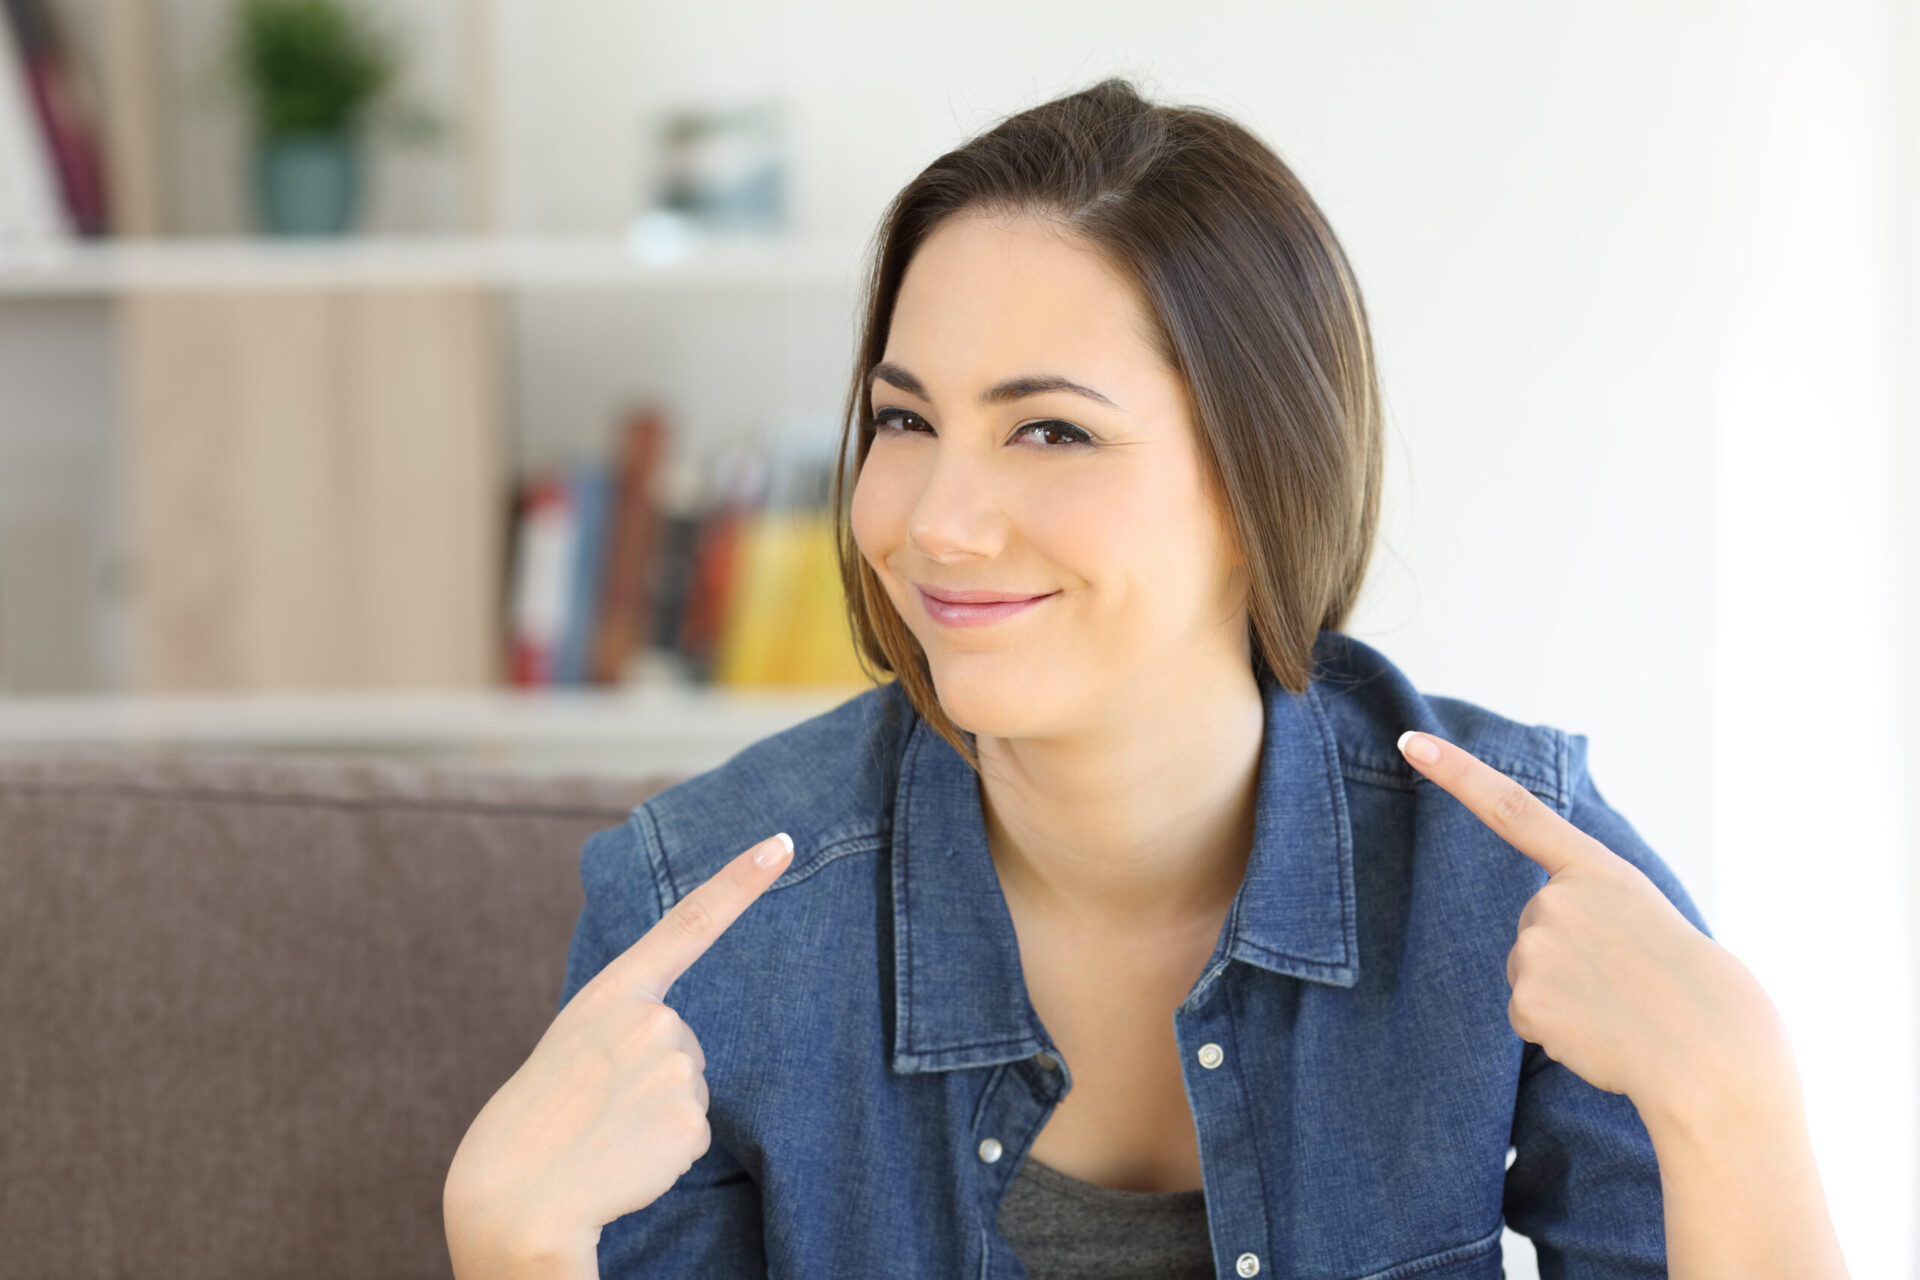 Woman smiling point both index fingers to herself